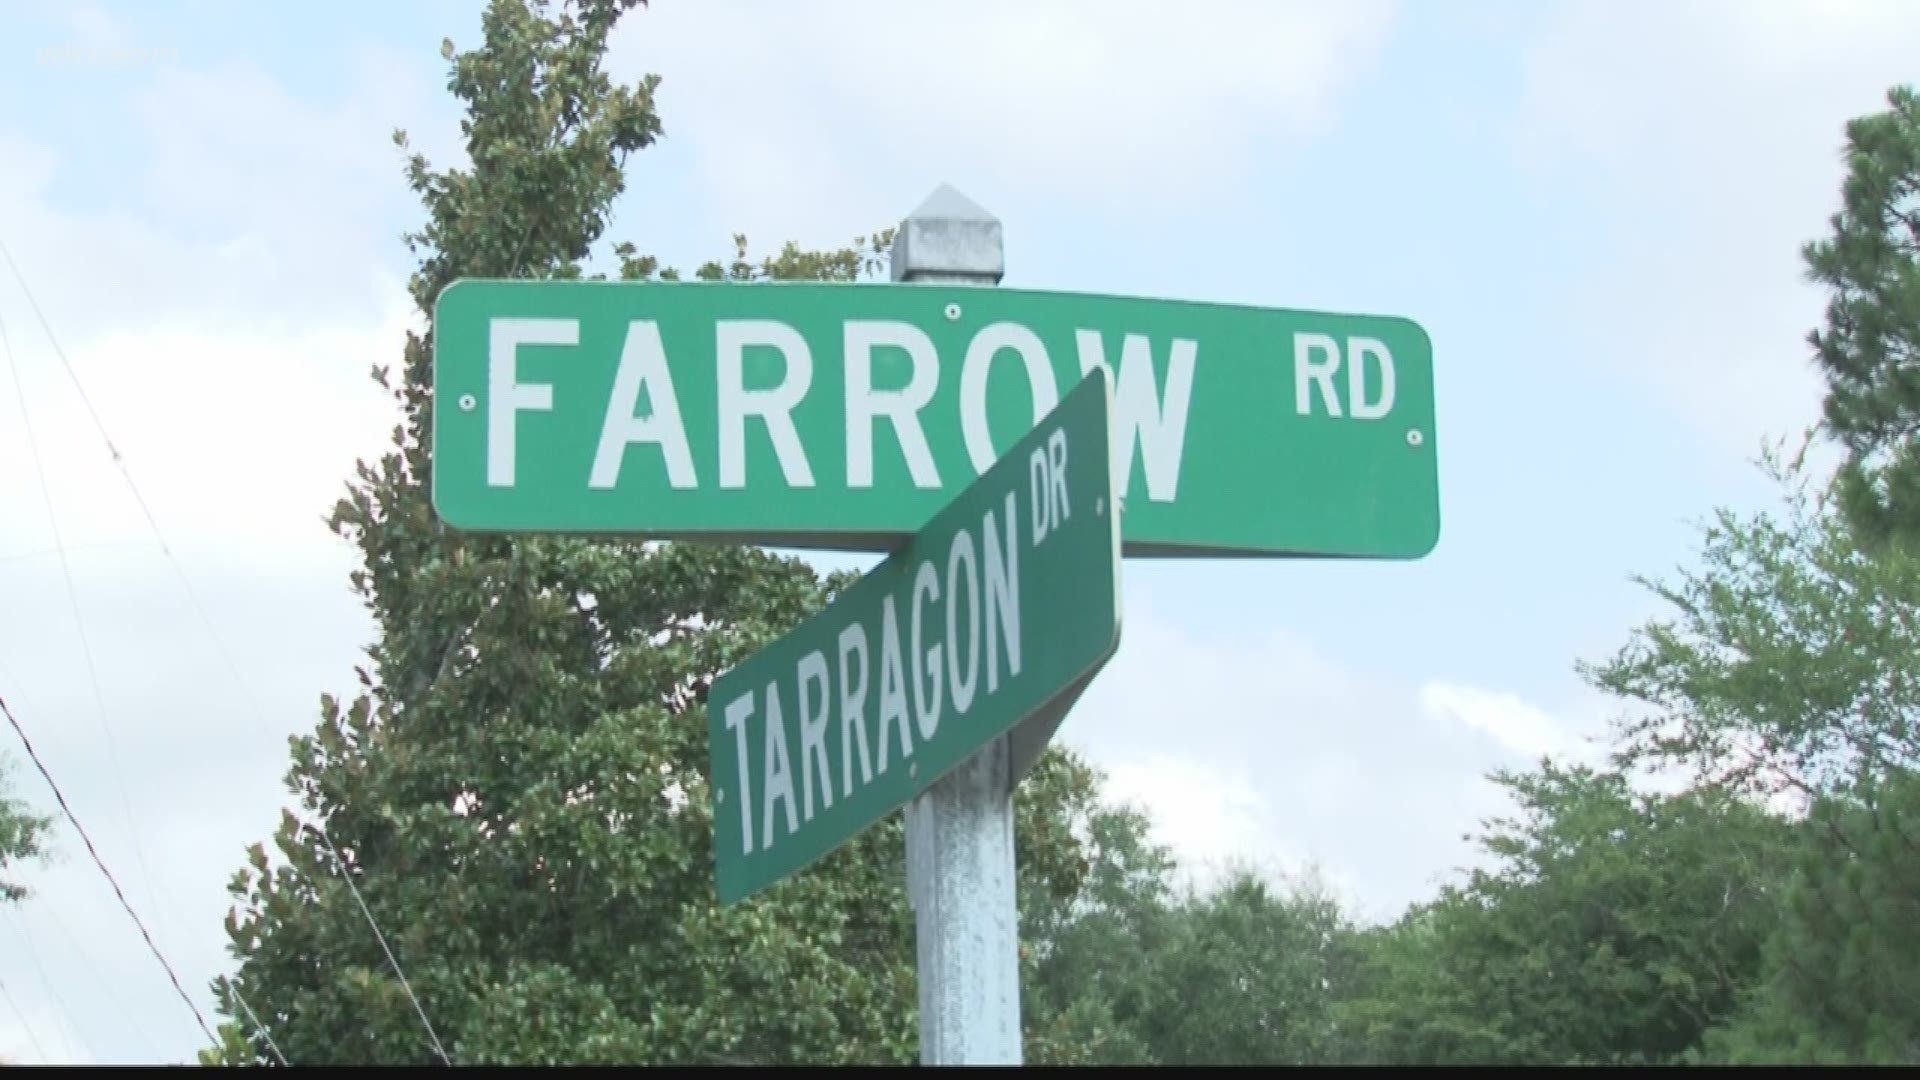 Last week, the city announced they would remove bike lanes along Farrow Road. Today, the project began.